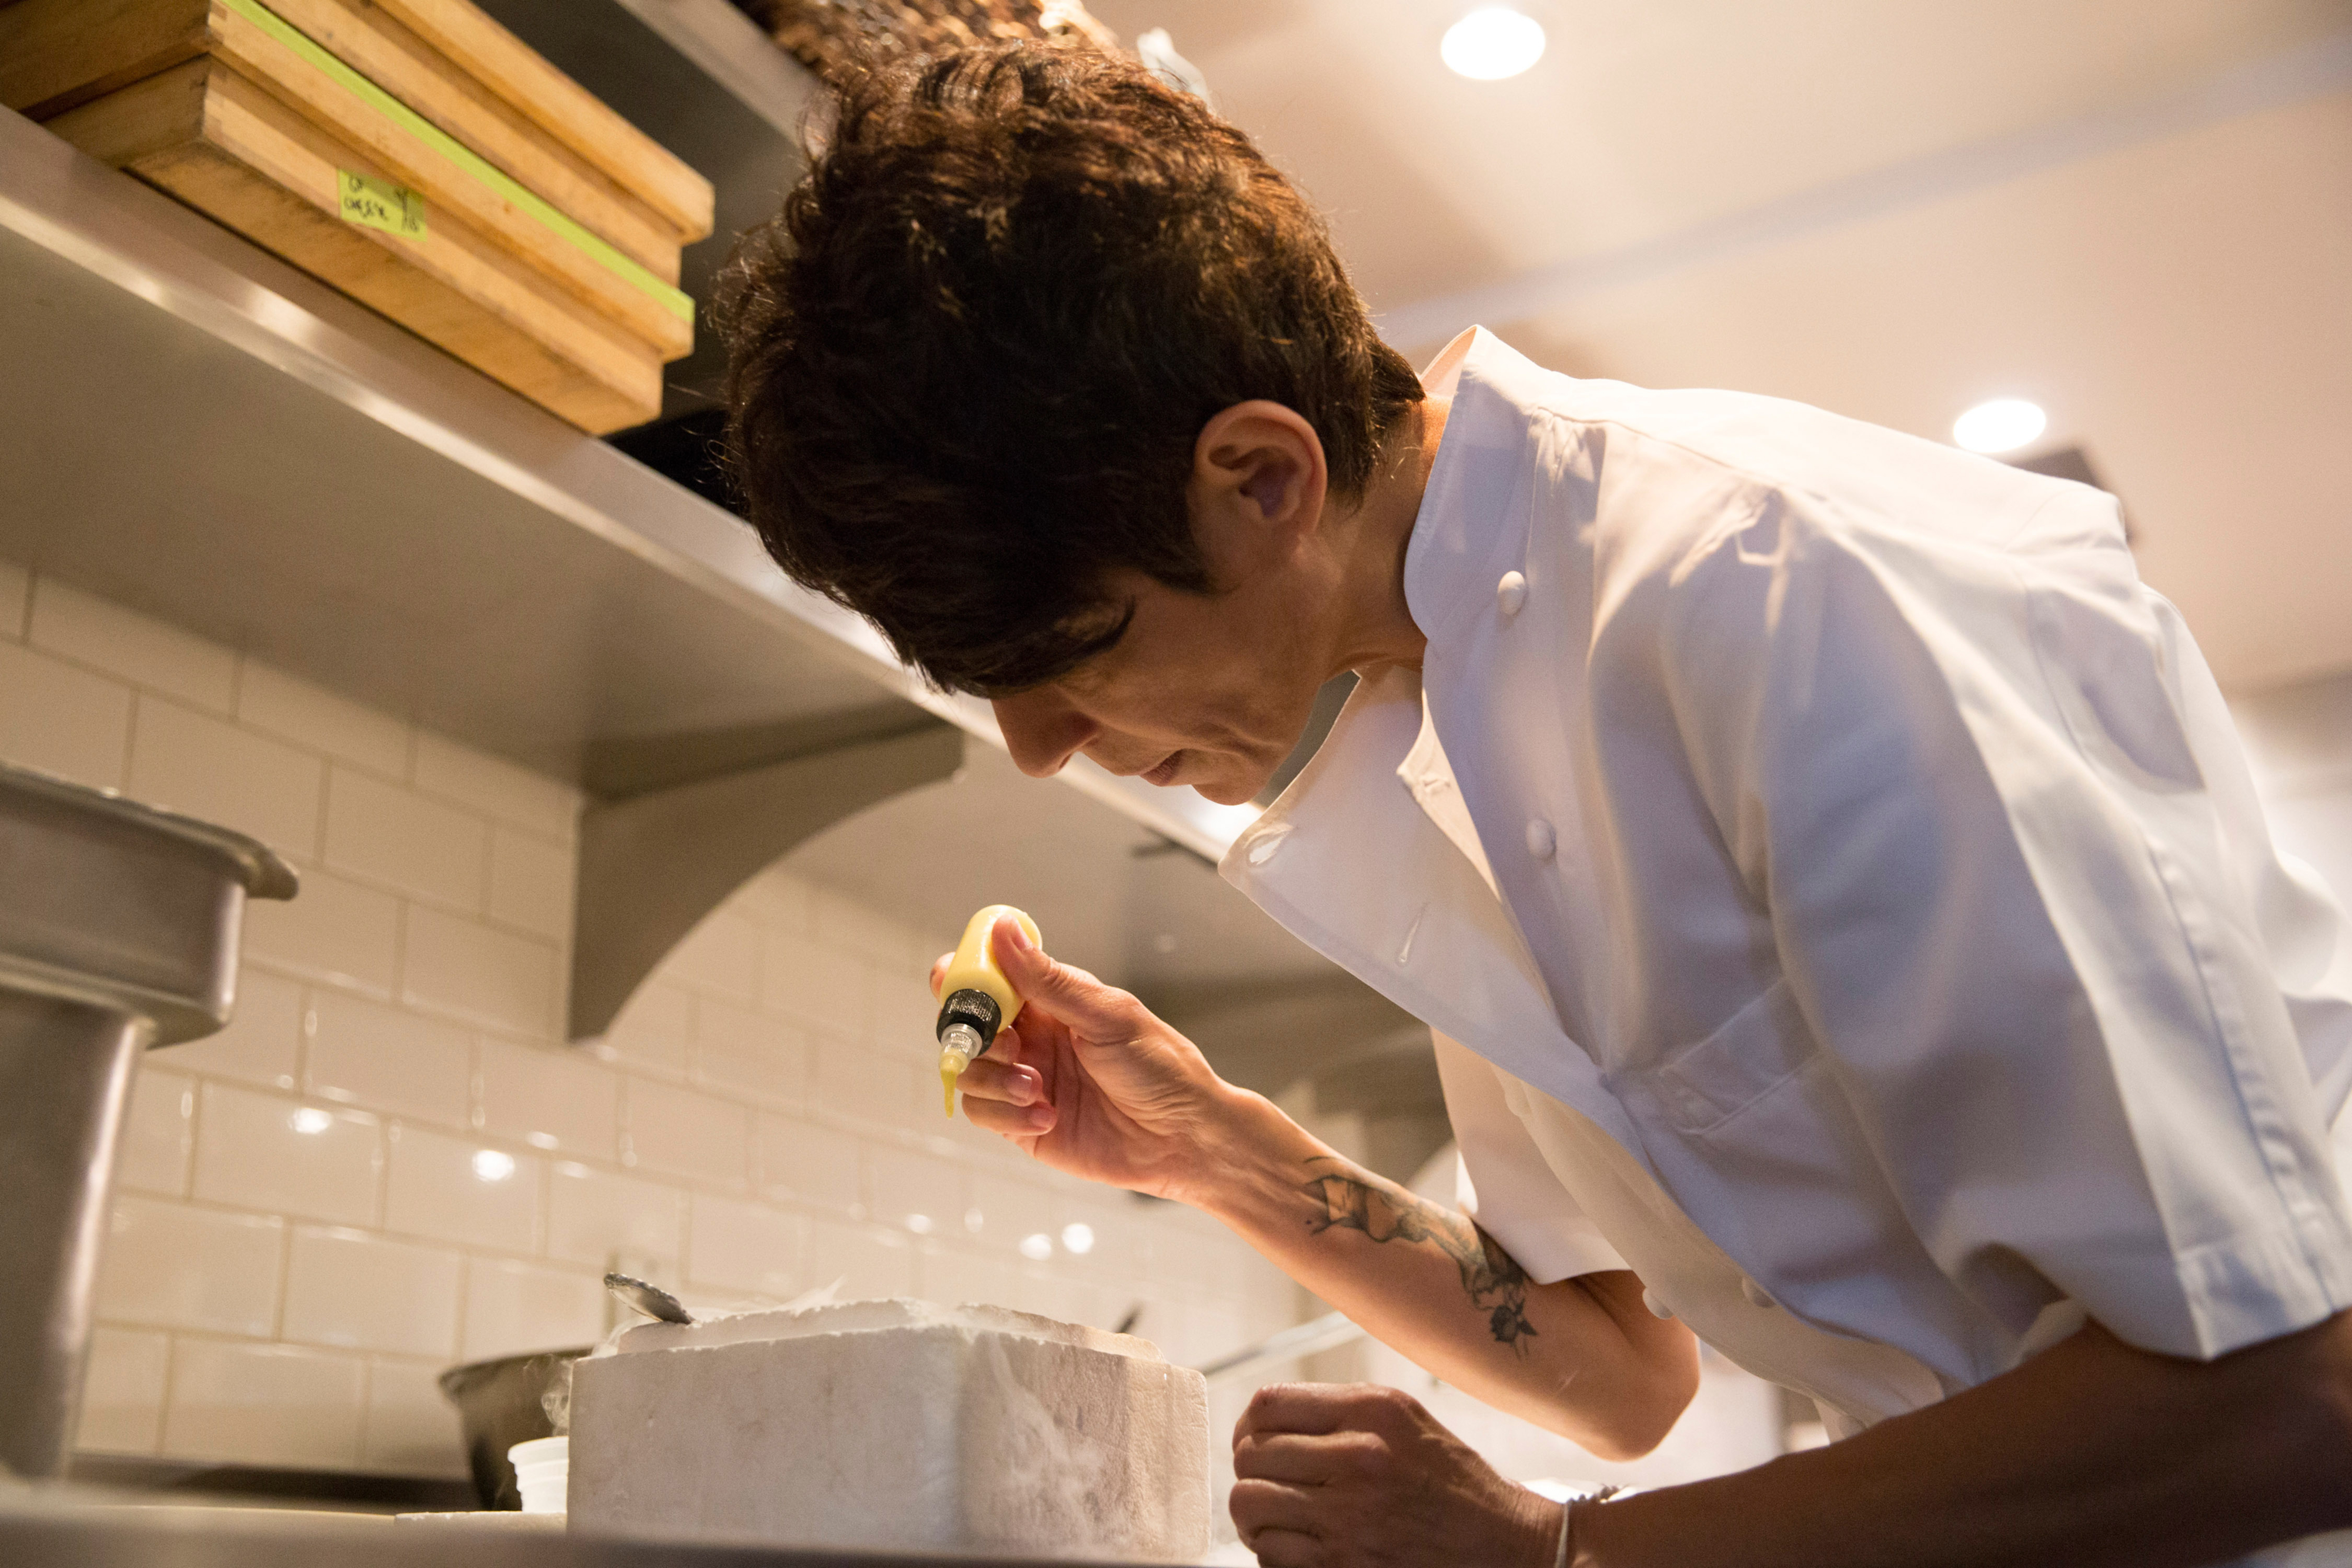 Chef in white uniform meticulously garnishing a dish in a professional kitchen